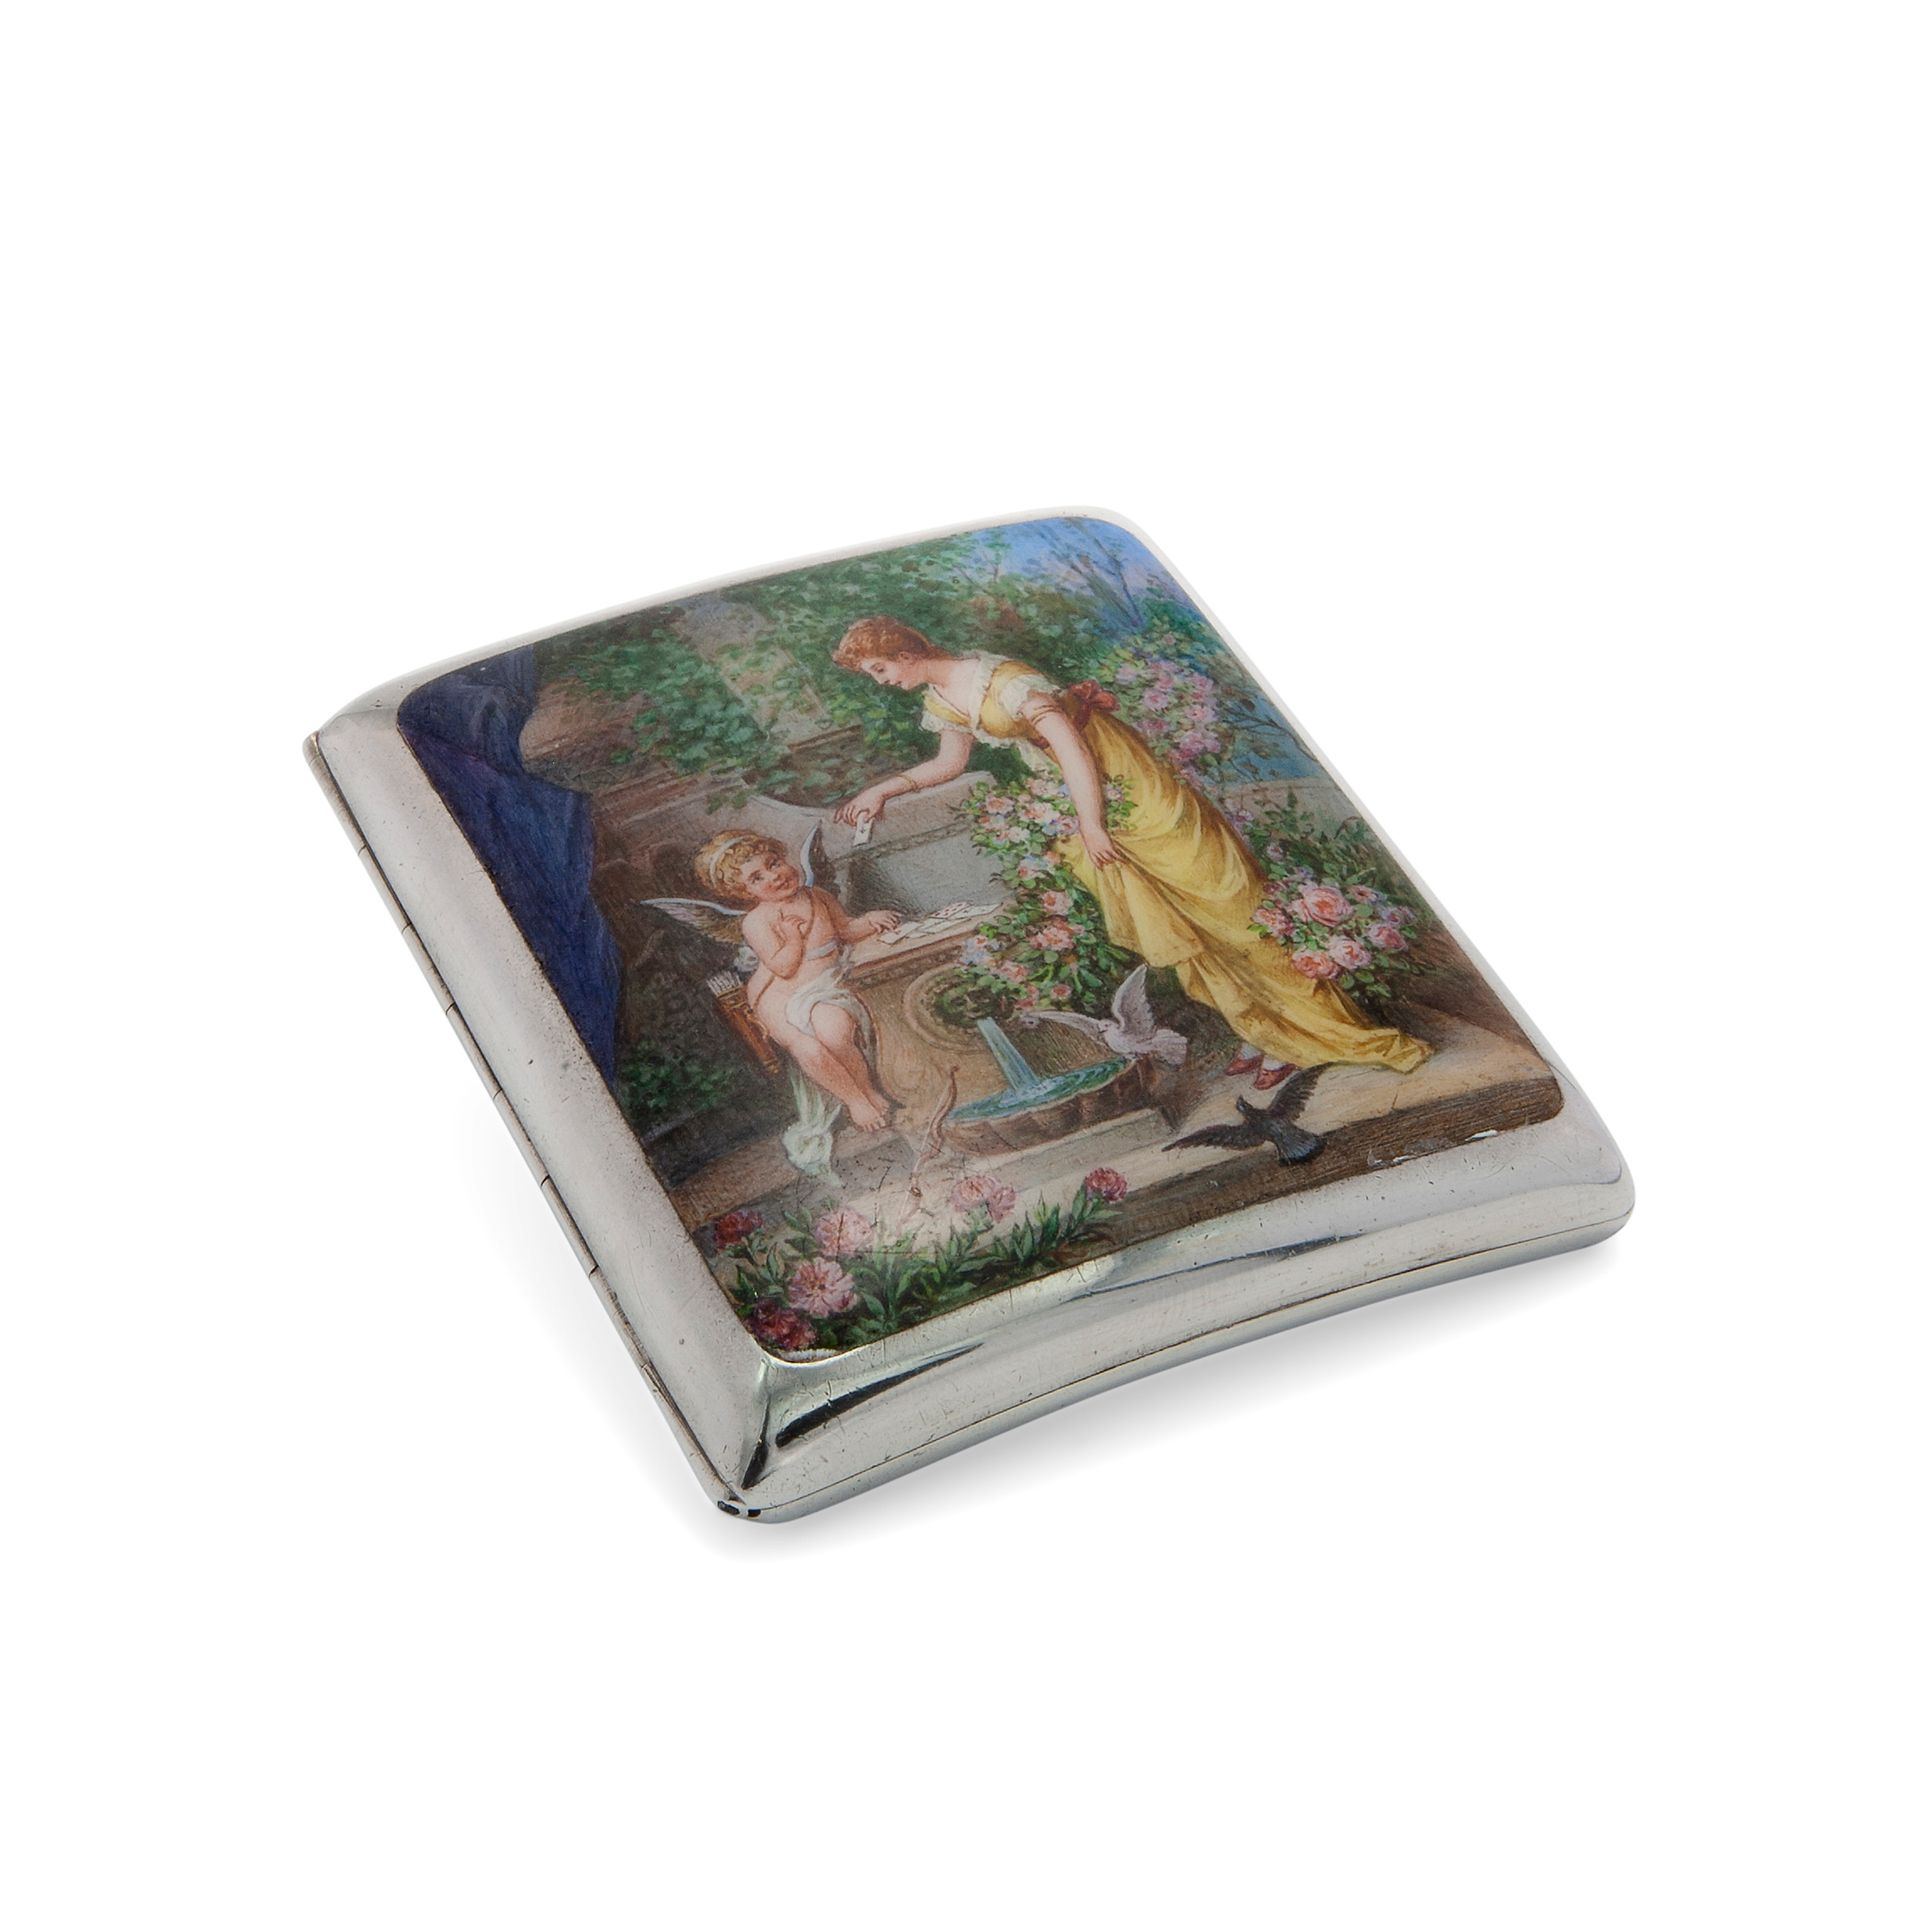 Silver and enamel cigarette case with young girl and Cupid, European manufacture&hellip;